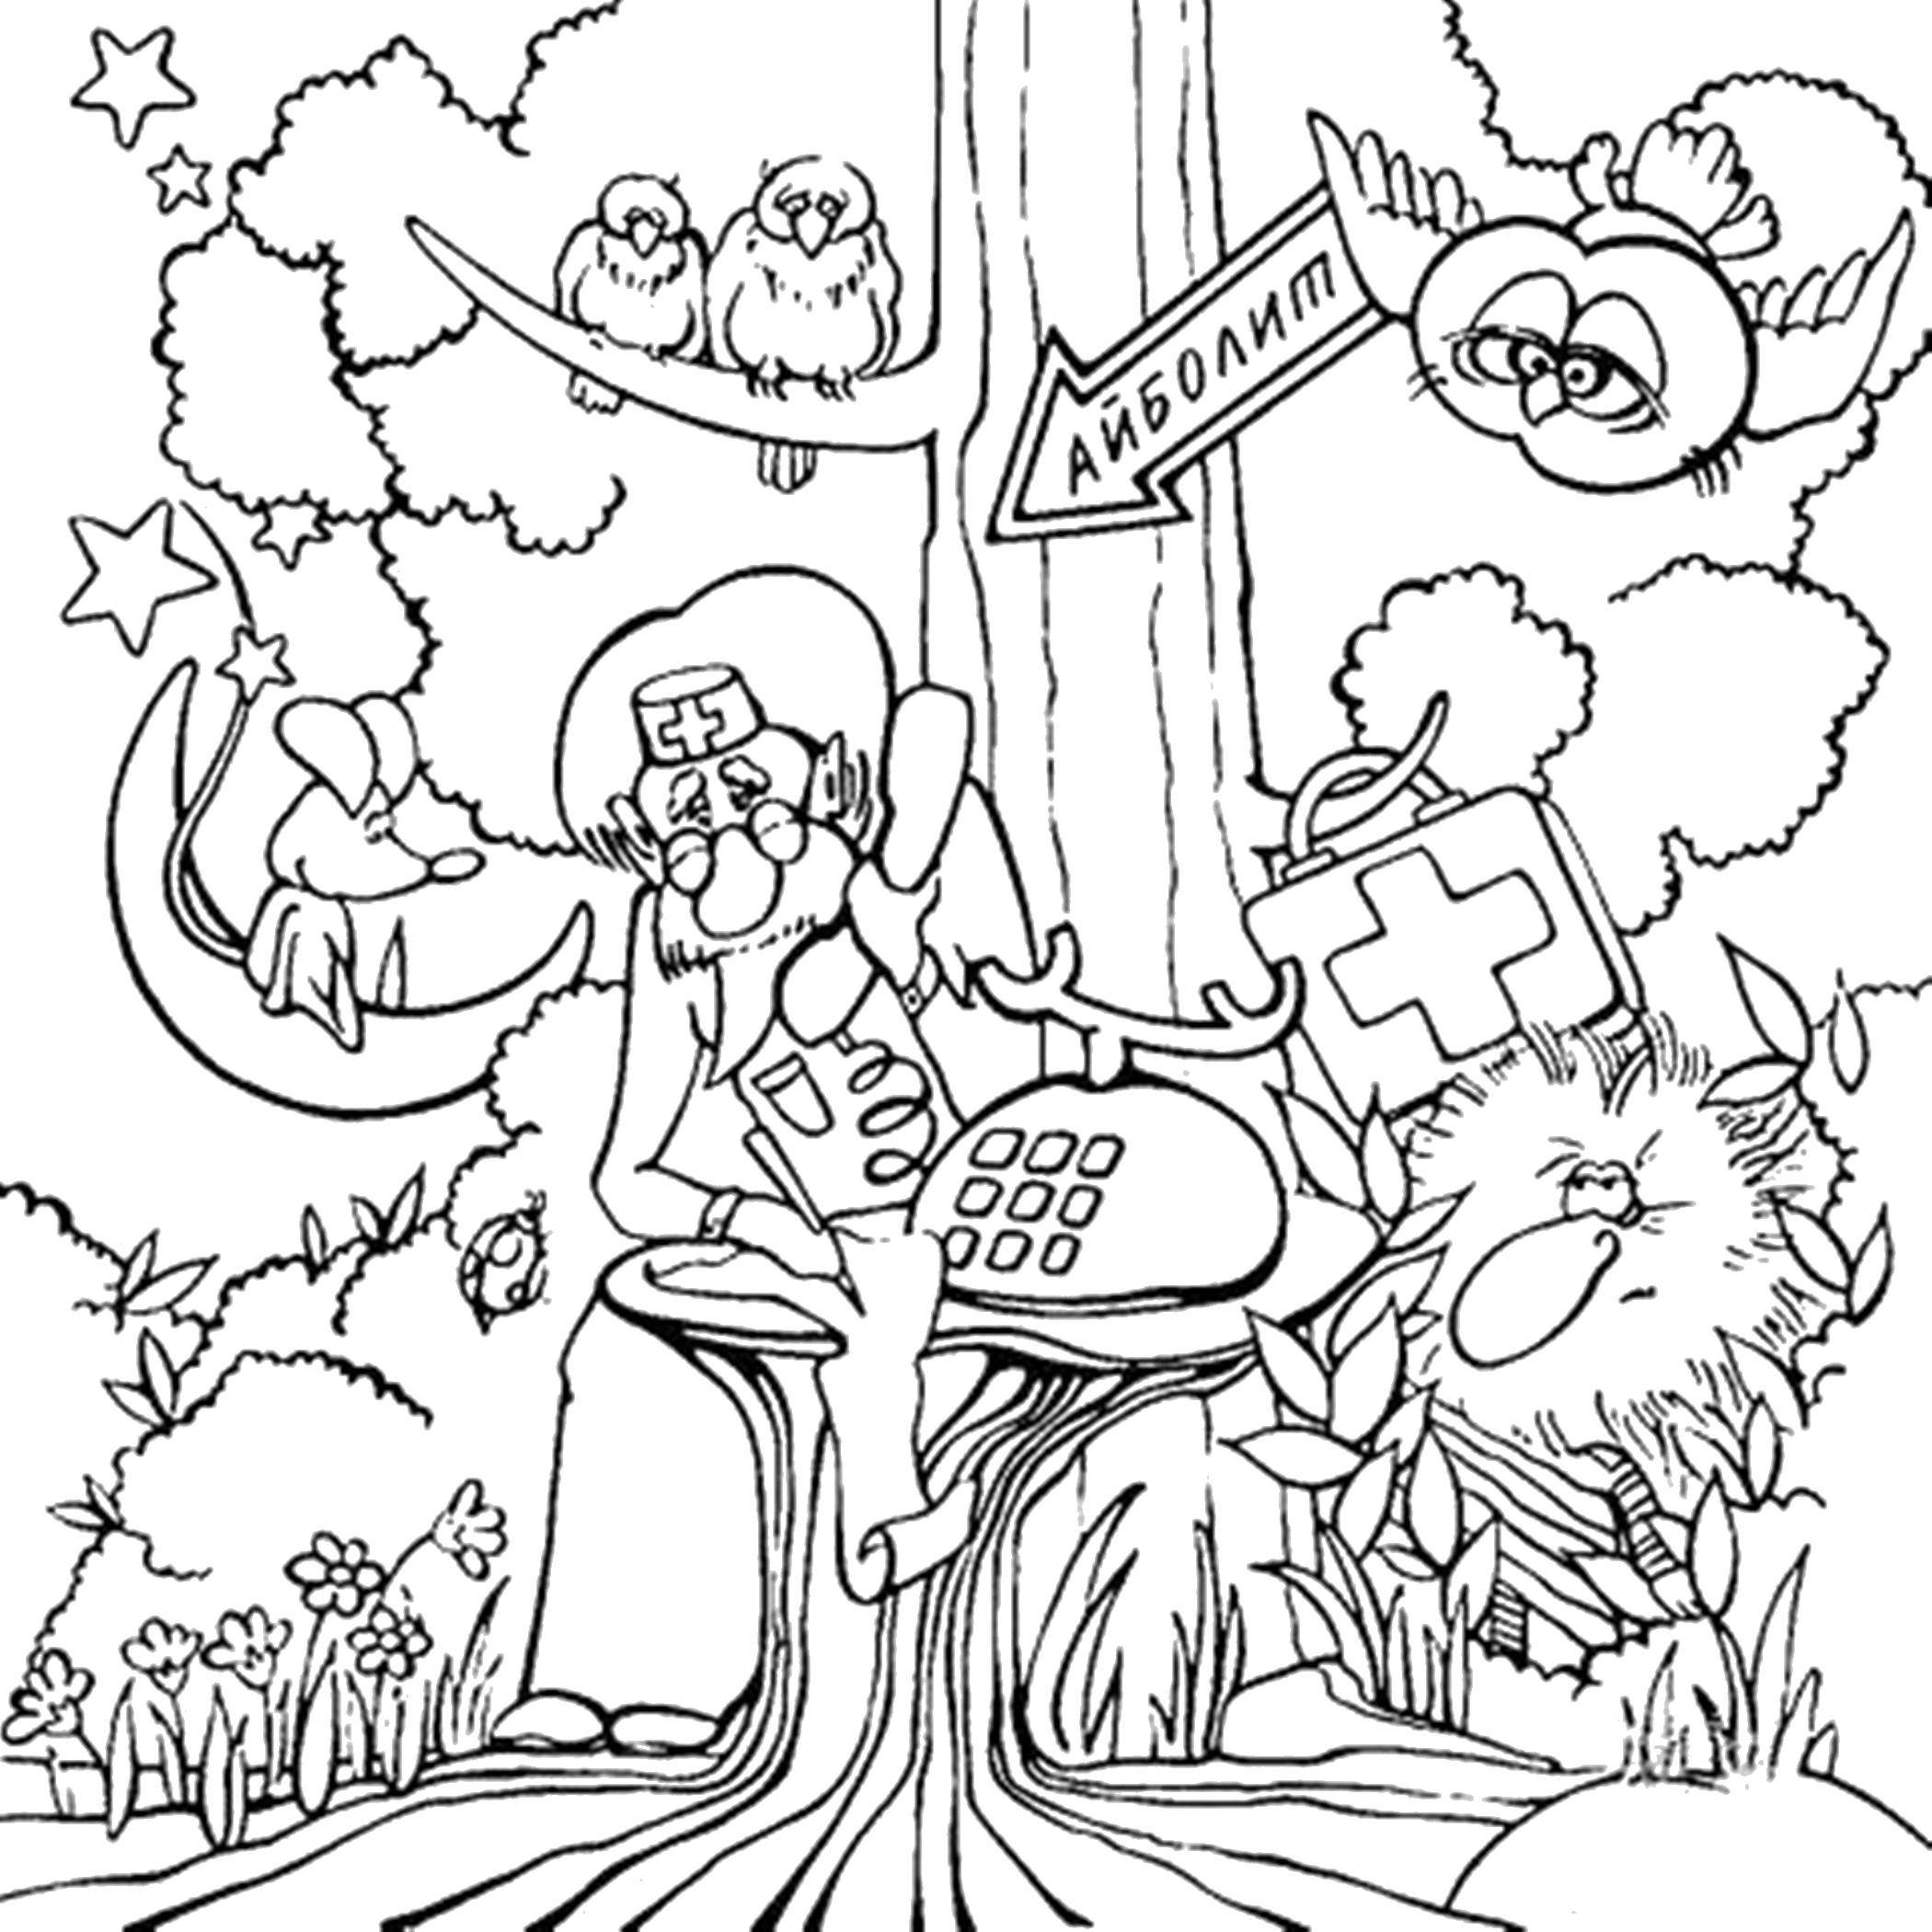 Coloring Aibolit and animals. Category Fairy tales. Tags:  Tales, "Aybolit".